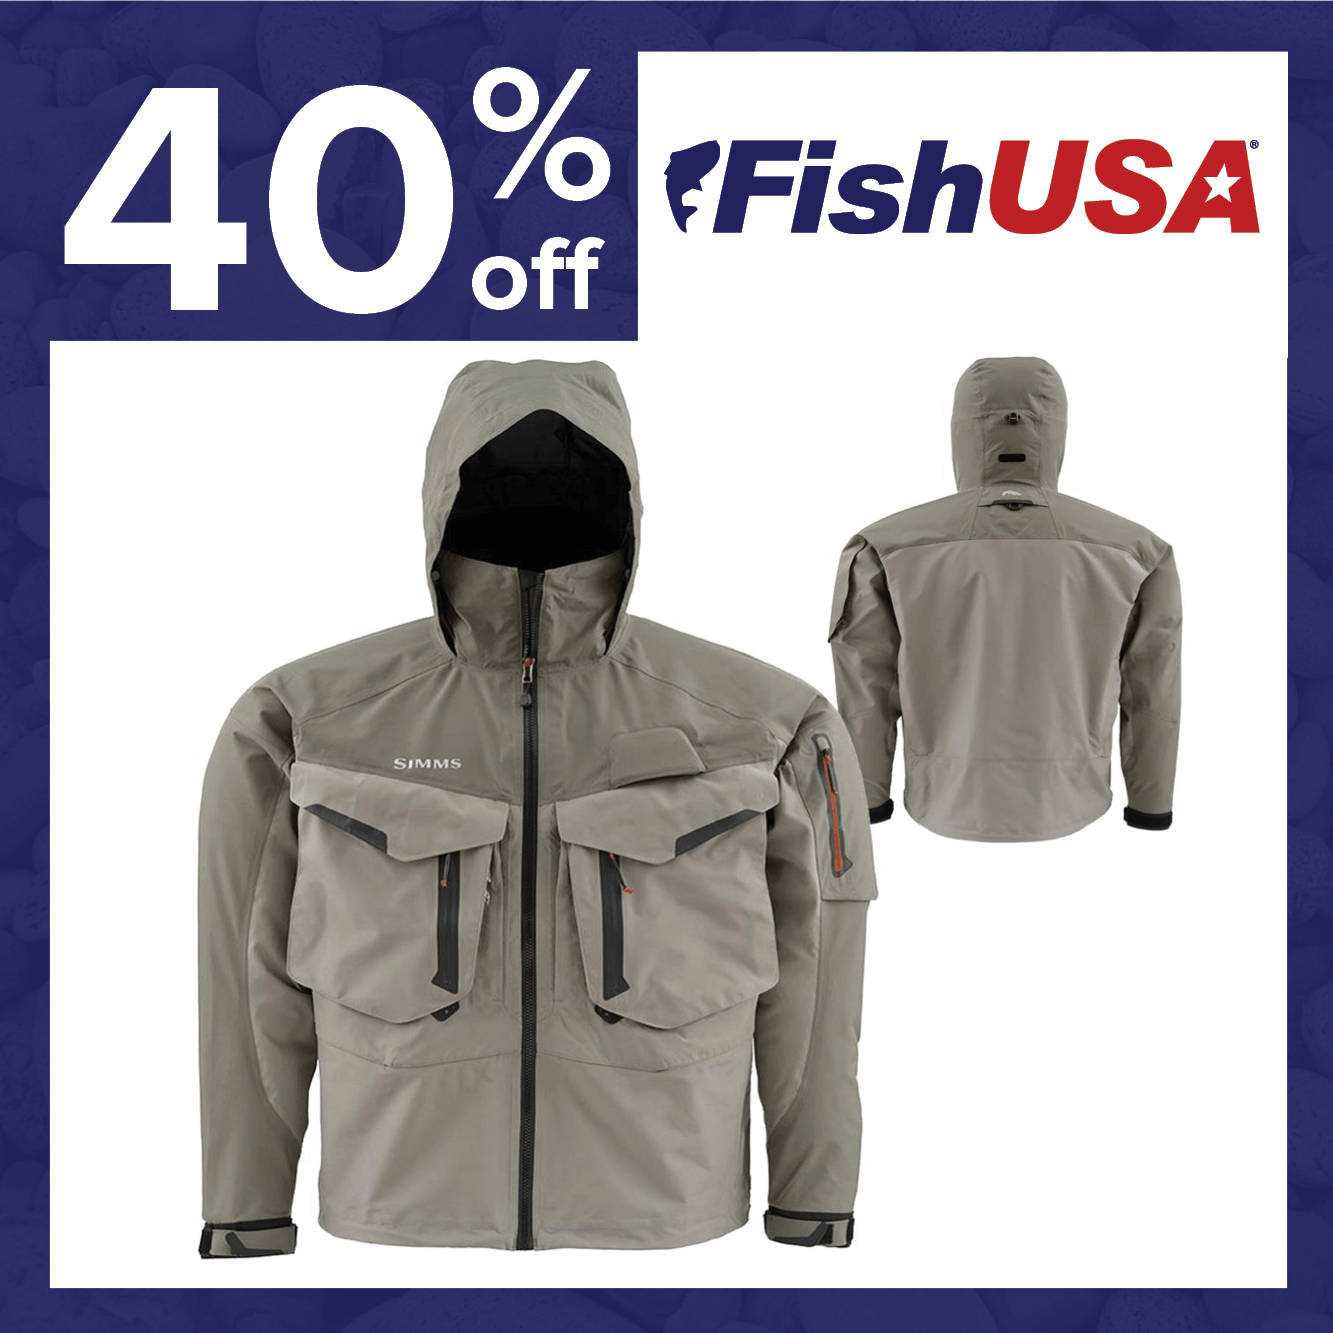 40% off the Simms G4 Pro Jacket